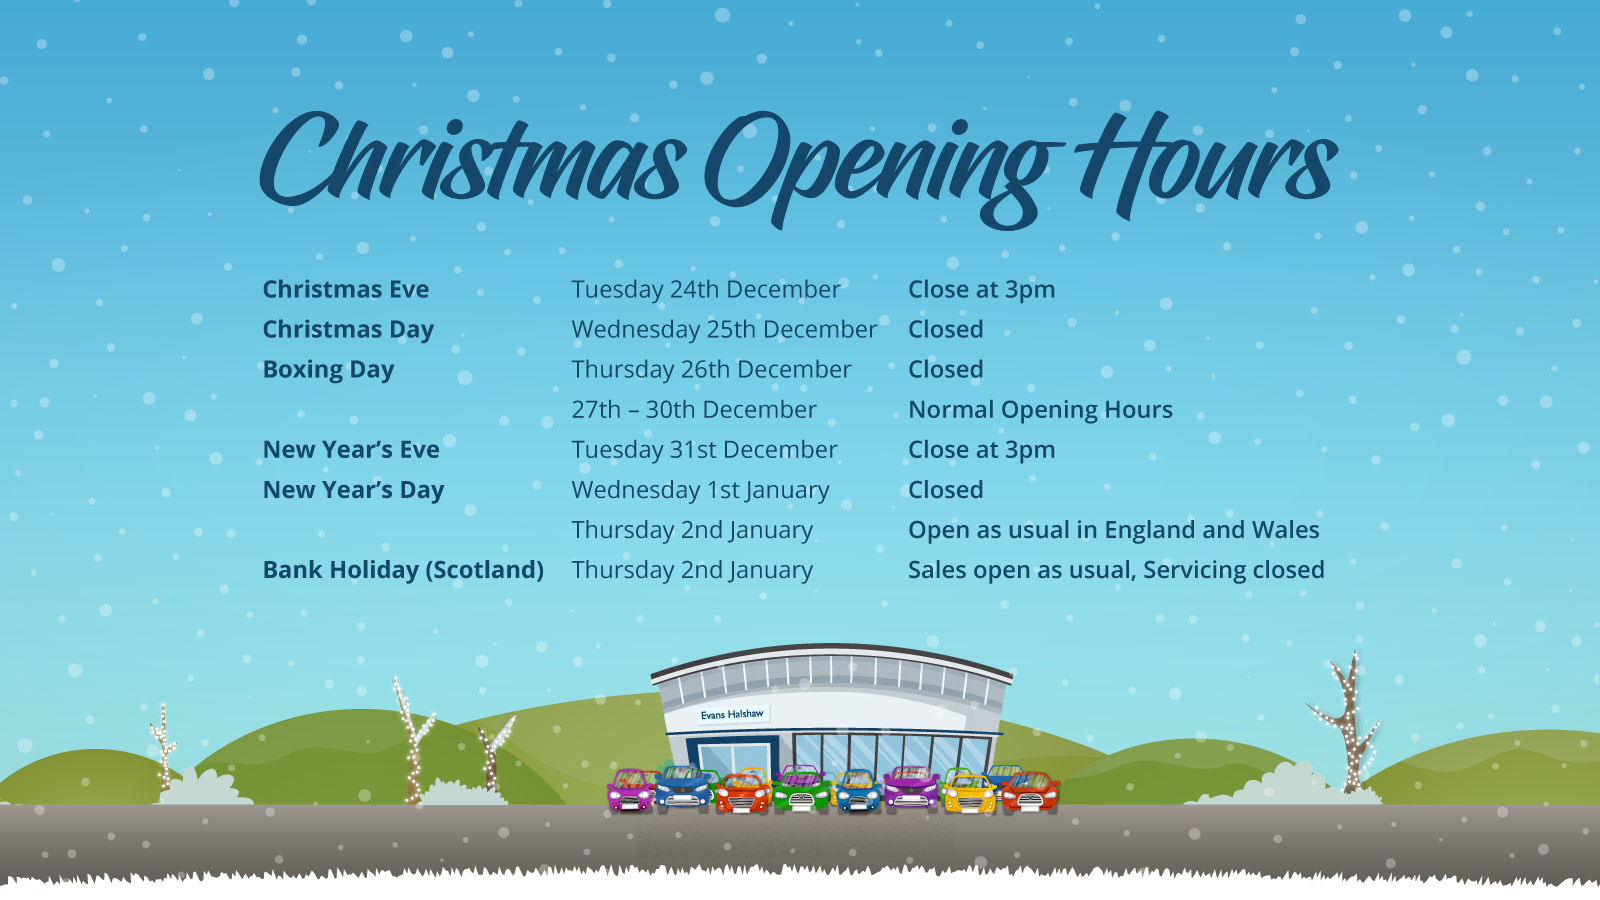 Evans Halshaw Christmas Opening Times 2019